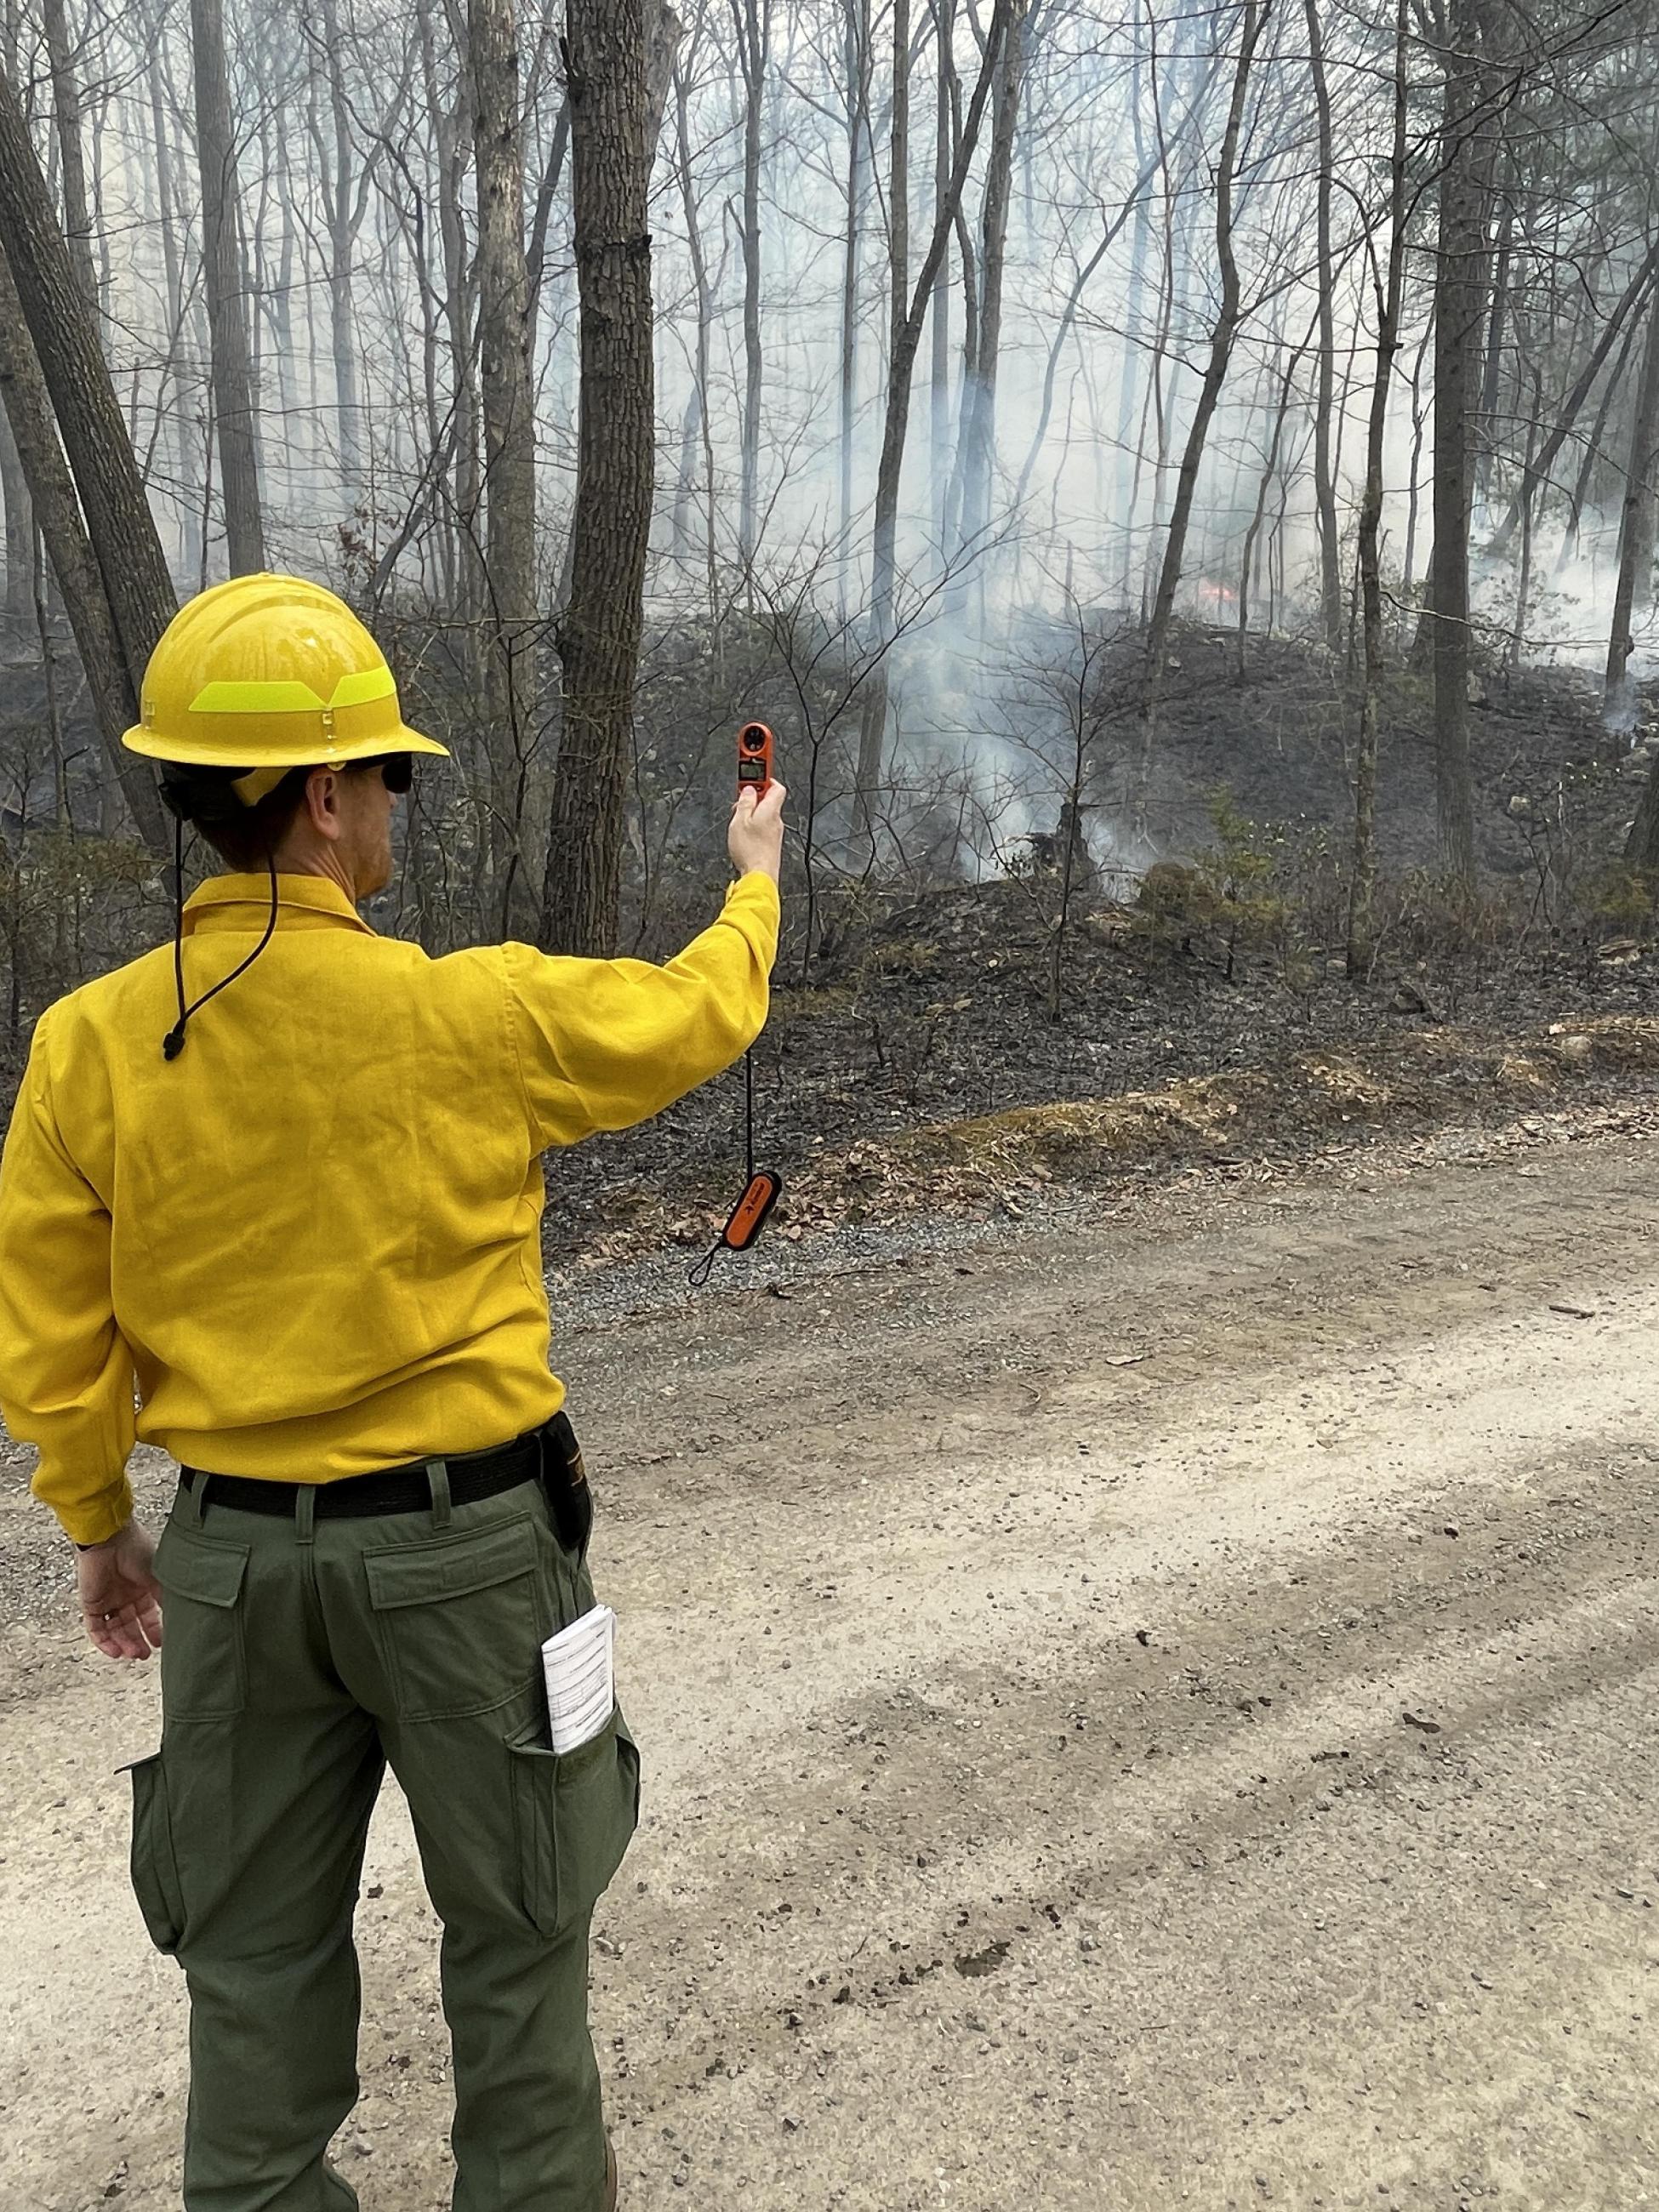 Firefighter standing in the road holding weather meter